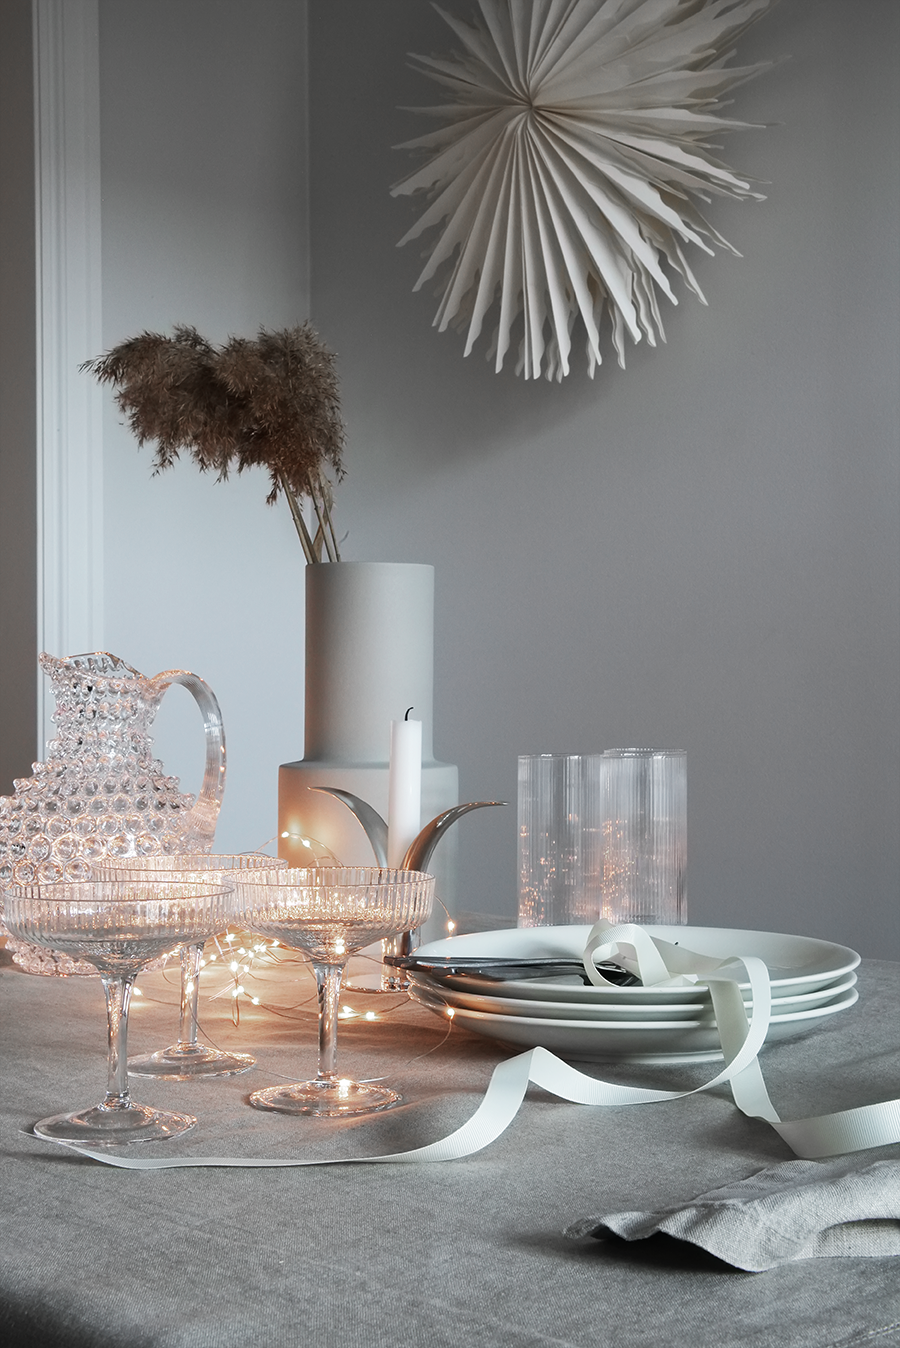 GET THE LOOK // EVERYTHING YOU NEED FOR THE NEW YEARS TABLE